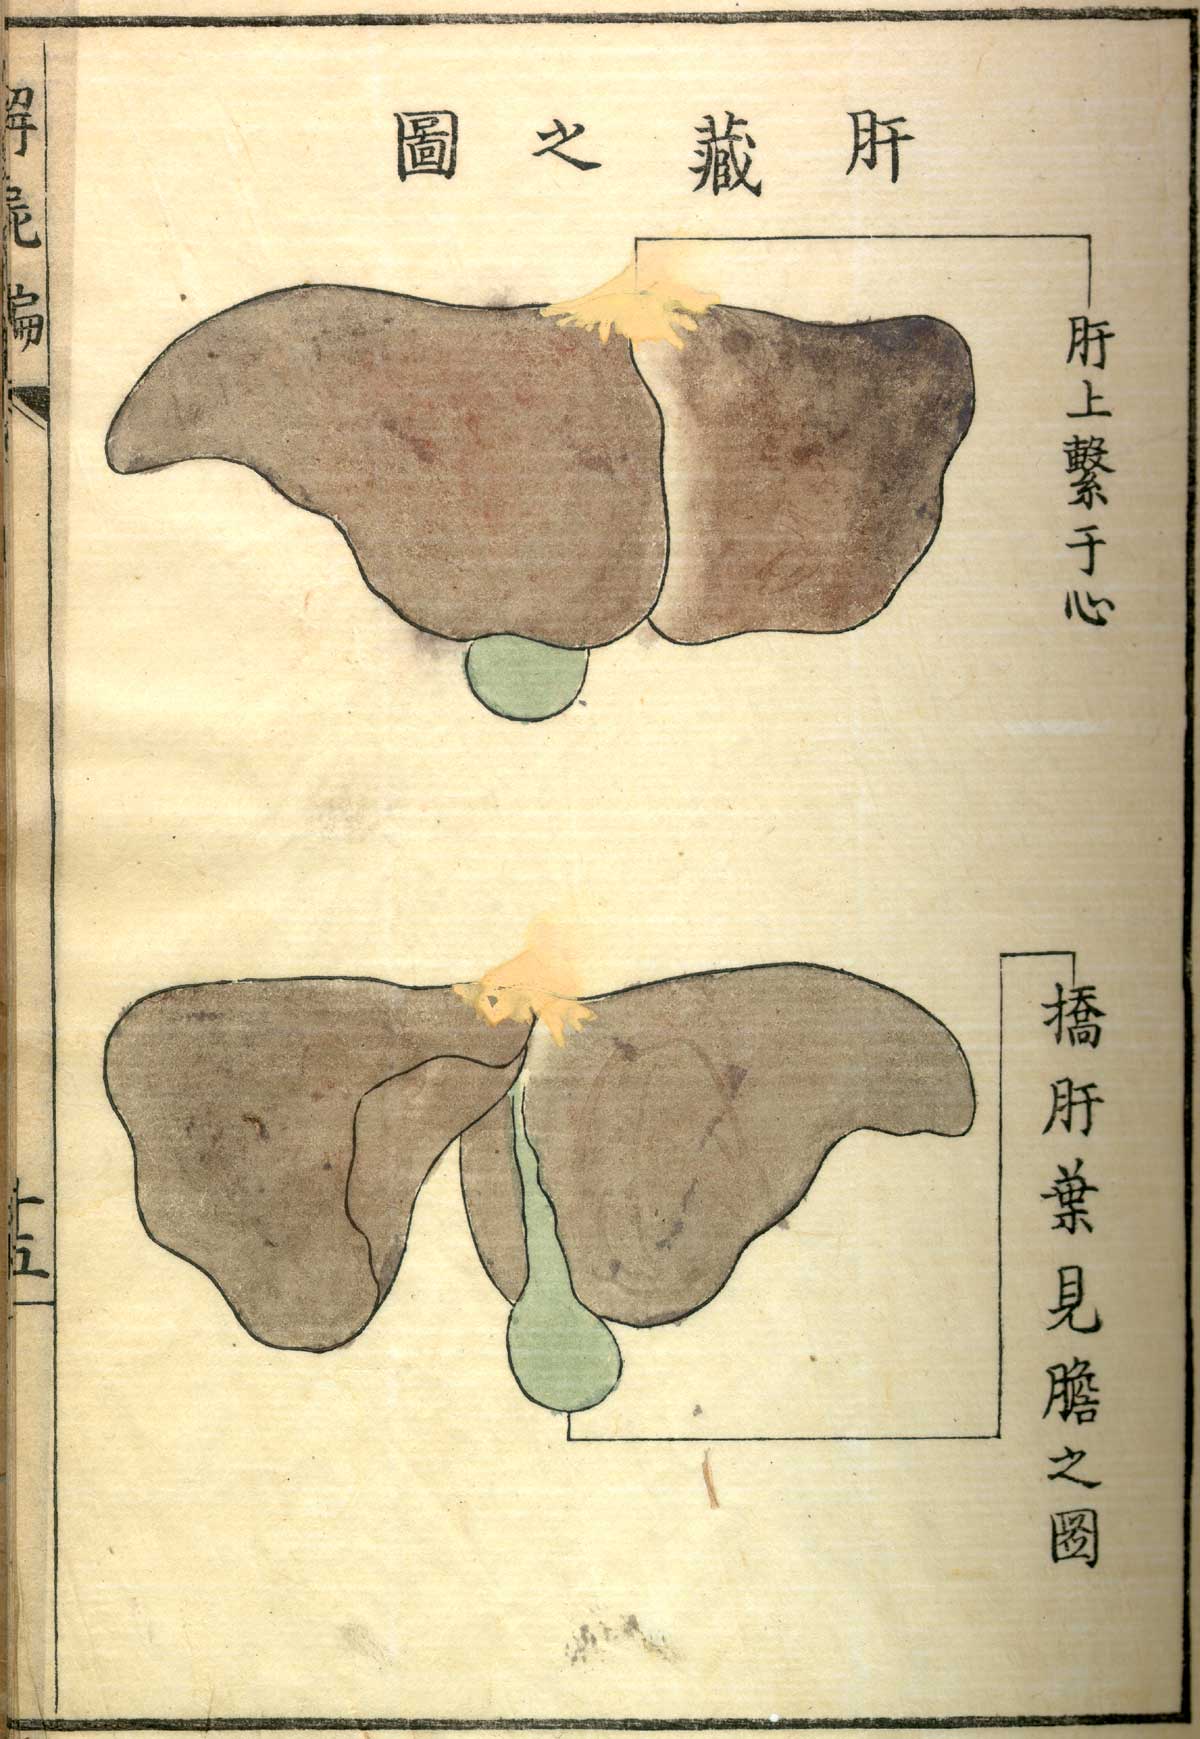 Hand colored woodcut of the liver and gall bladder shown from the front and the rear with Japanese text above and below describing some of the structures, from Shinnin Kawaguchi's Kaishi hen, NLM Call no.: WZ 260 K21k 1772.